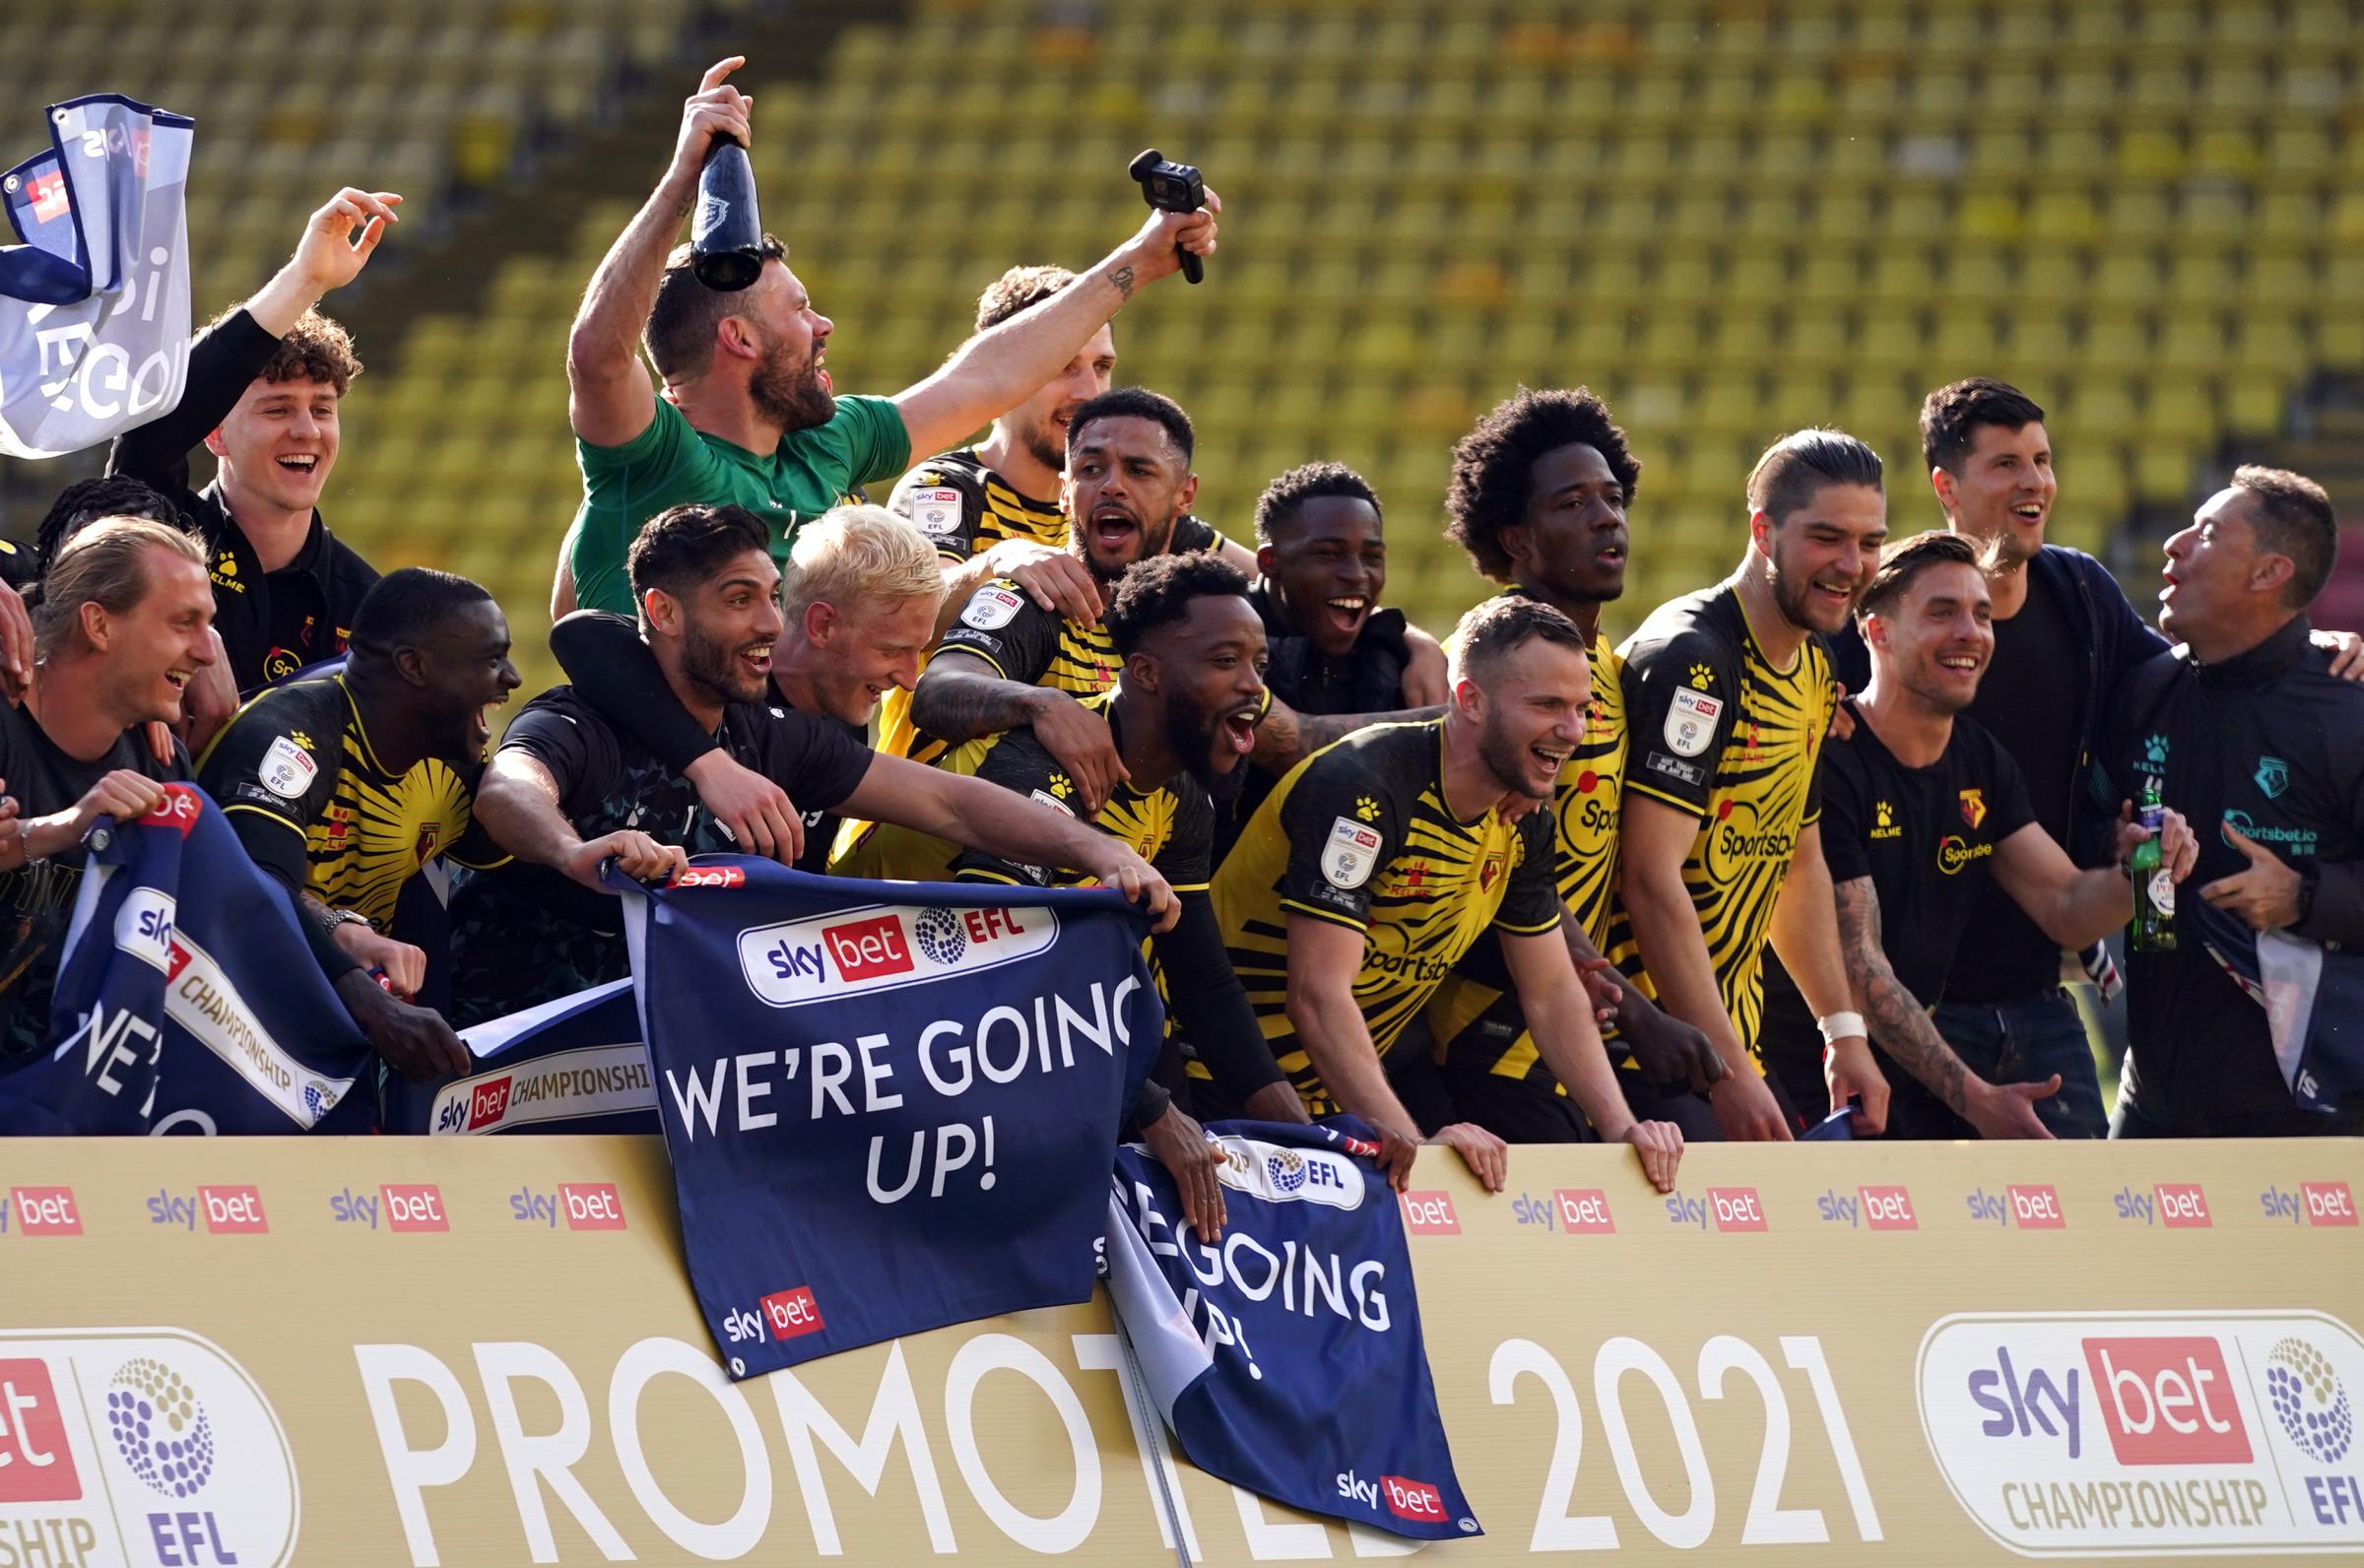 Watford players celebrates at the final whistle following. Photo: PA